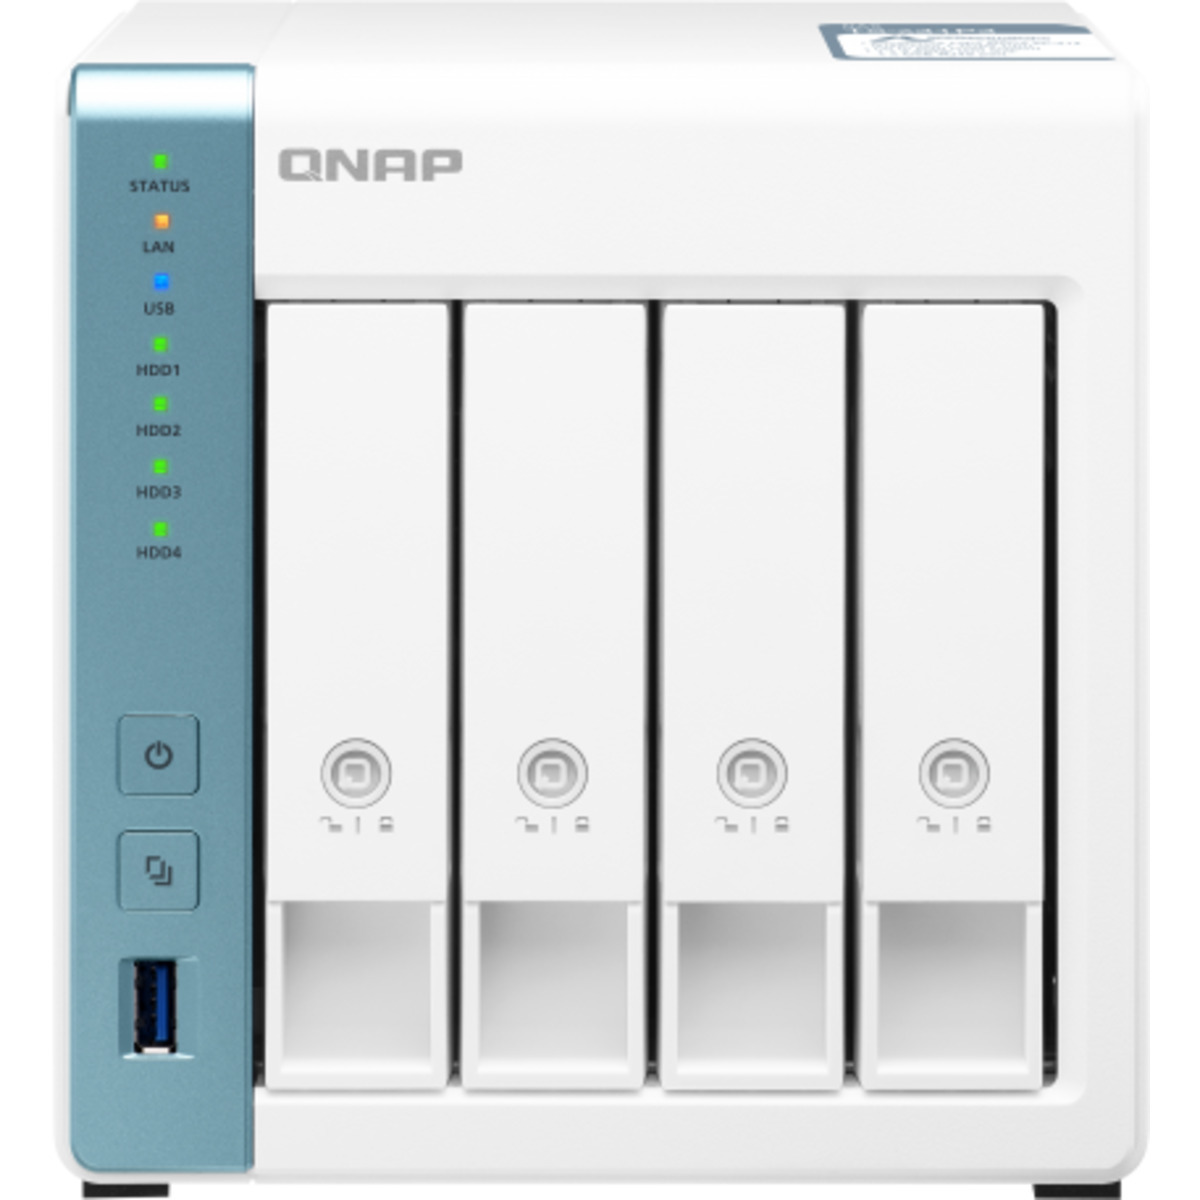 buy $1644 QNAP TS-431P3 8tb Desktop NAS - Network Attached Storage Device 4x2000gb Western Digital Red SA500 WDS200T1R0A 2.5 SATA 6Gb/s SSD NAS Class Drives Installed - Burn-In Tested - FREE RAM UPGRADE - nas headquarters buy network attached storage server device das new raid-5 free shipping usa TS-431P3